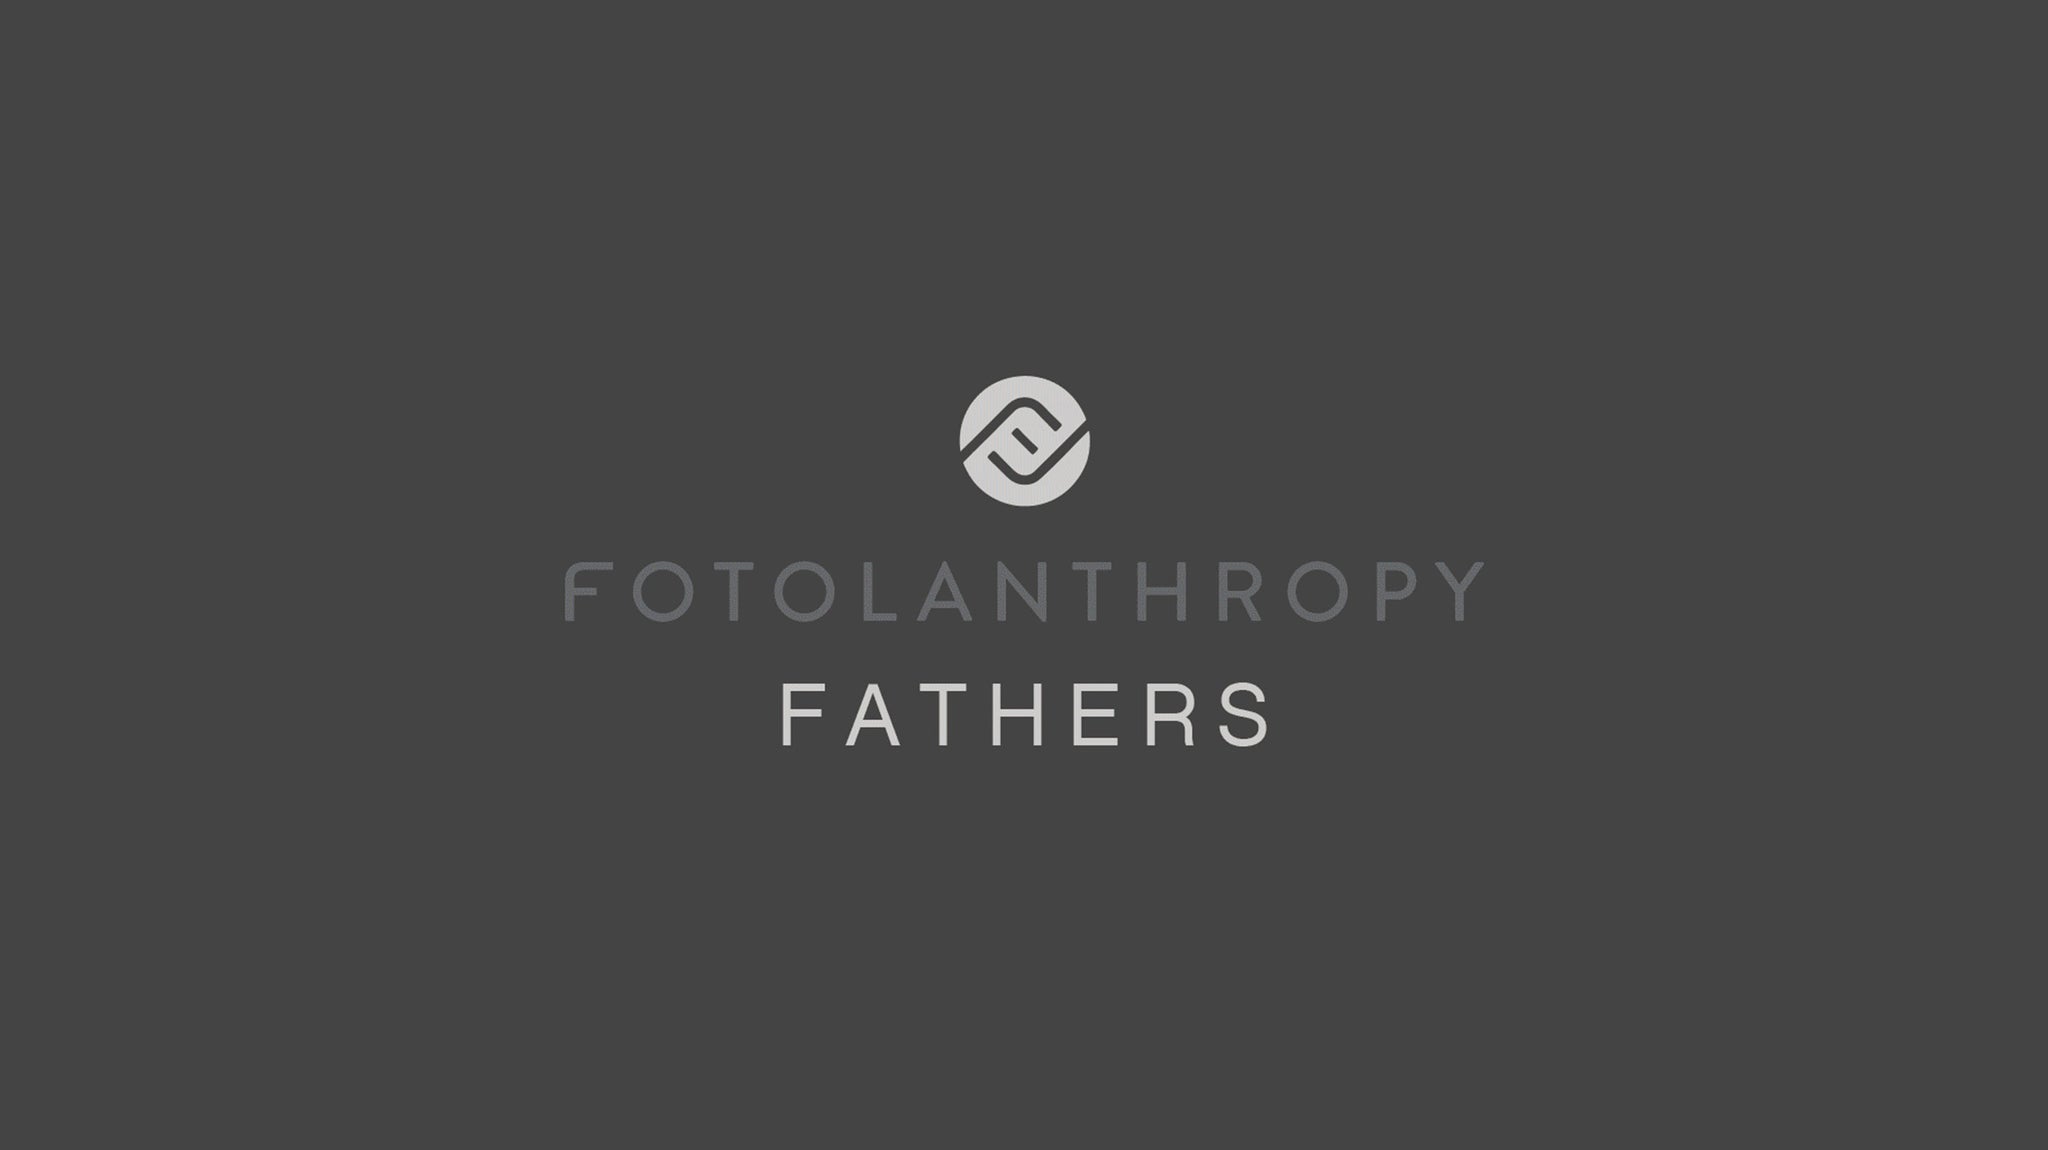 Fotolanthropy Fathers for Father's Day | FOTO Blog